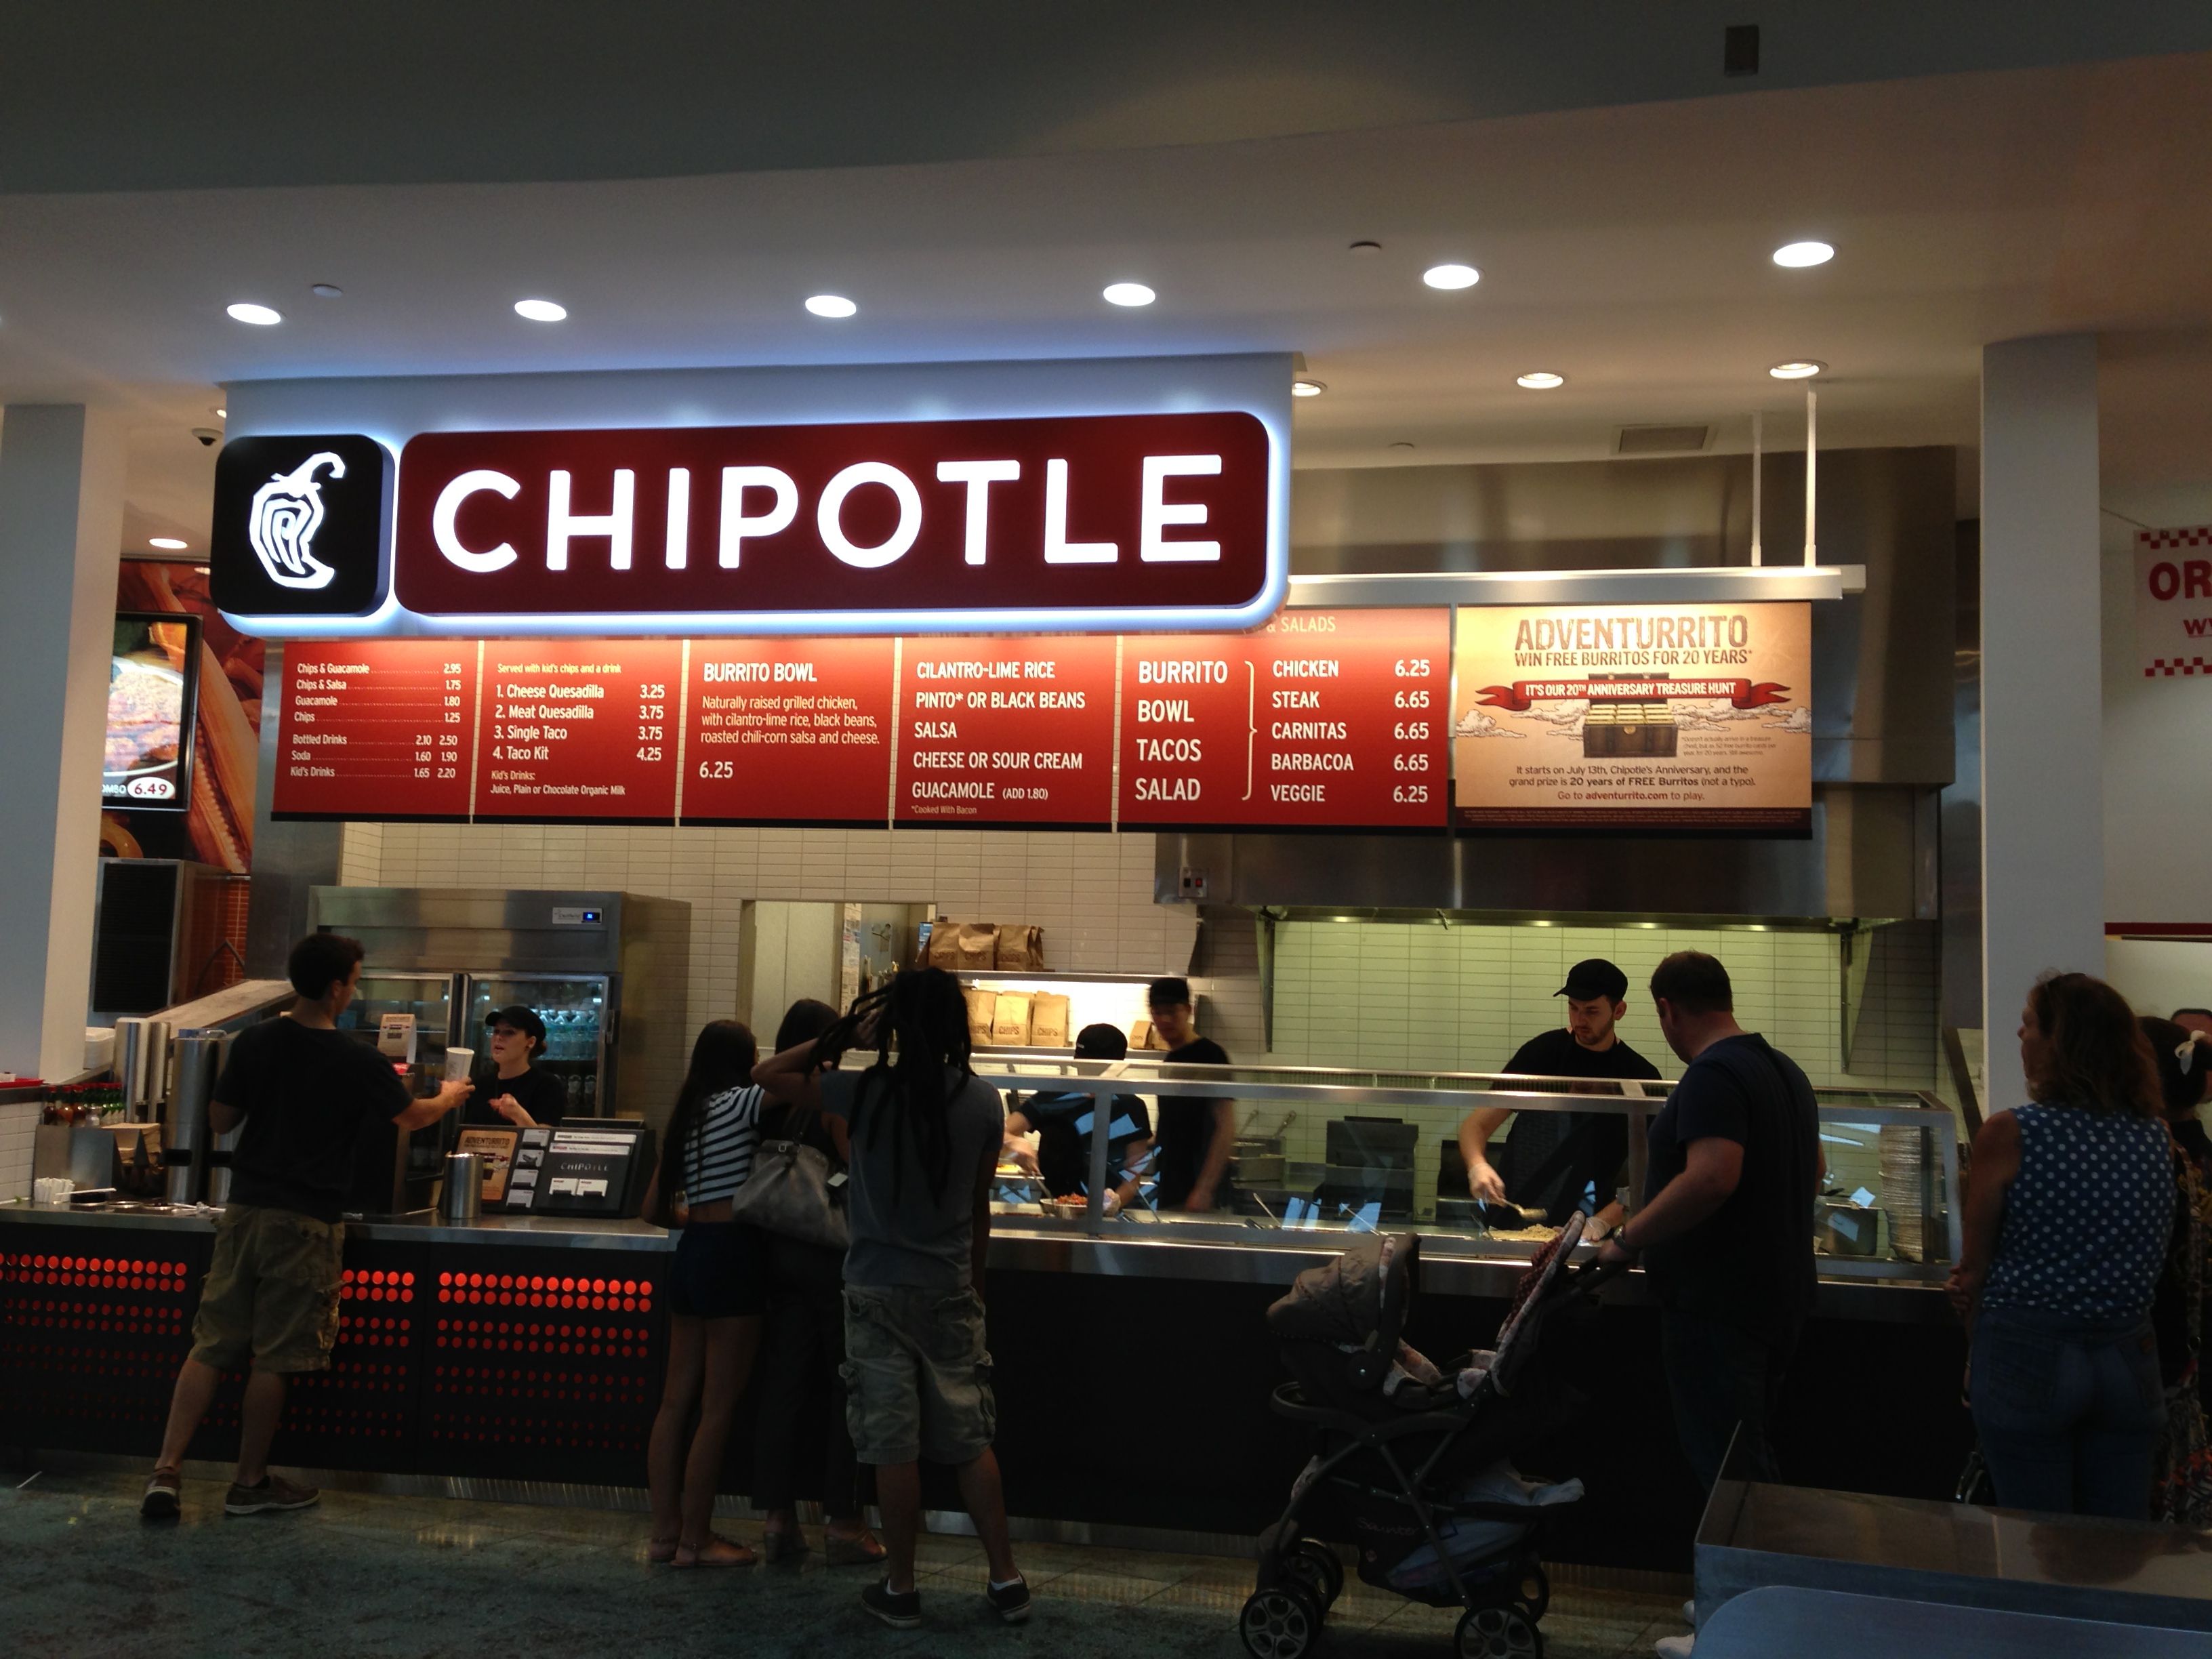 Chipotle emergency: Authorities scramble to contain Norovirus outbreak